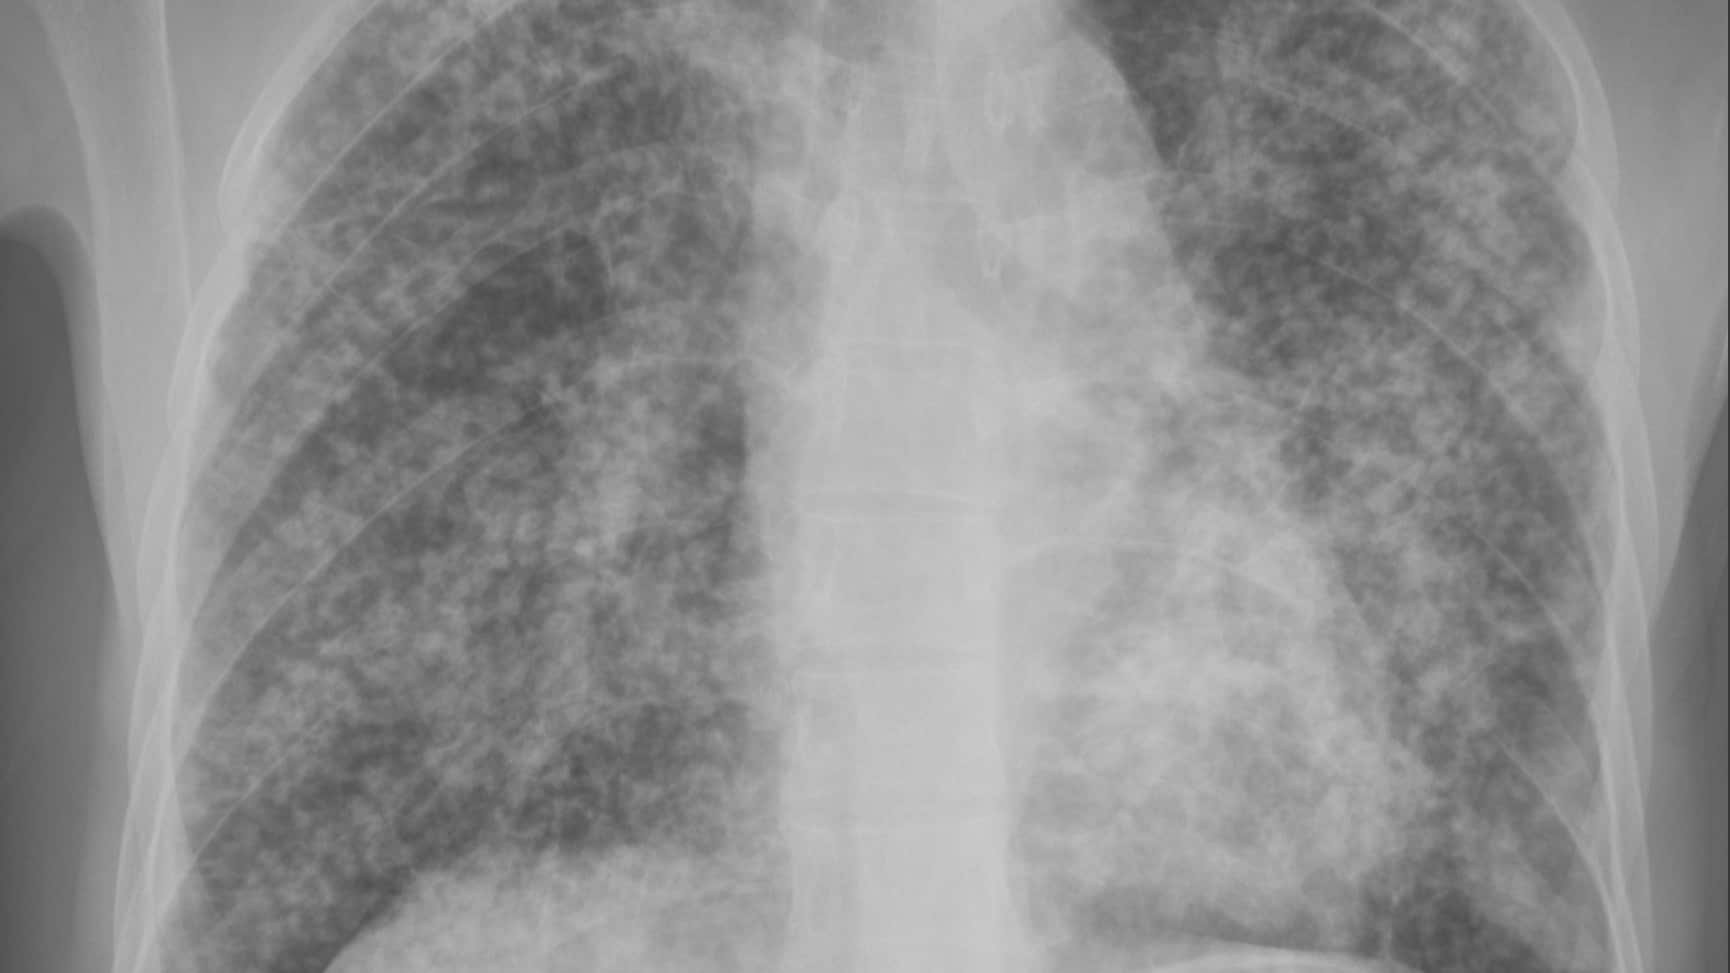 An x-ray of a lung with disease.